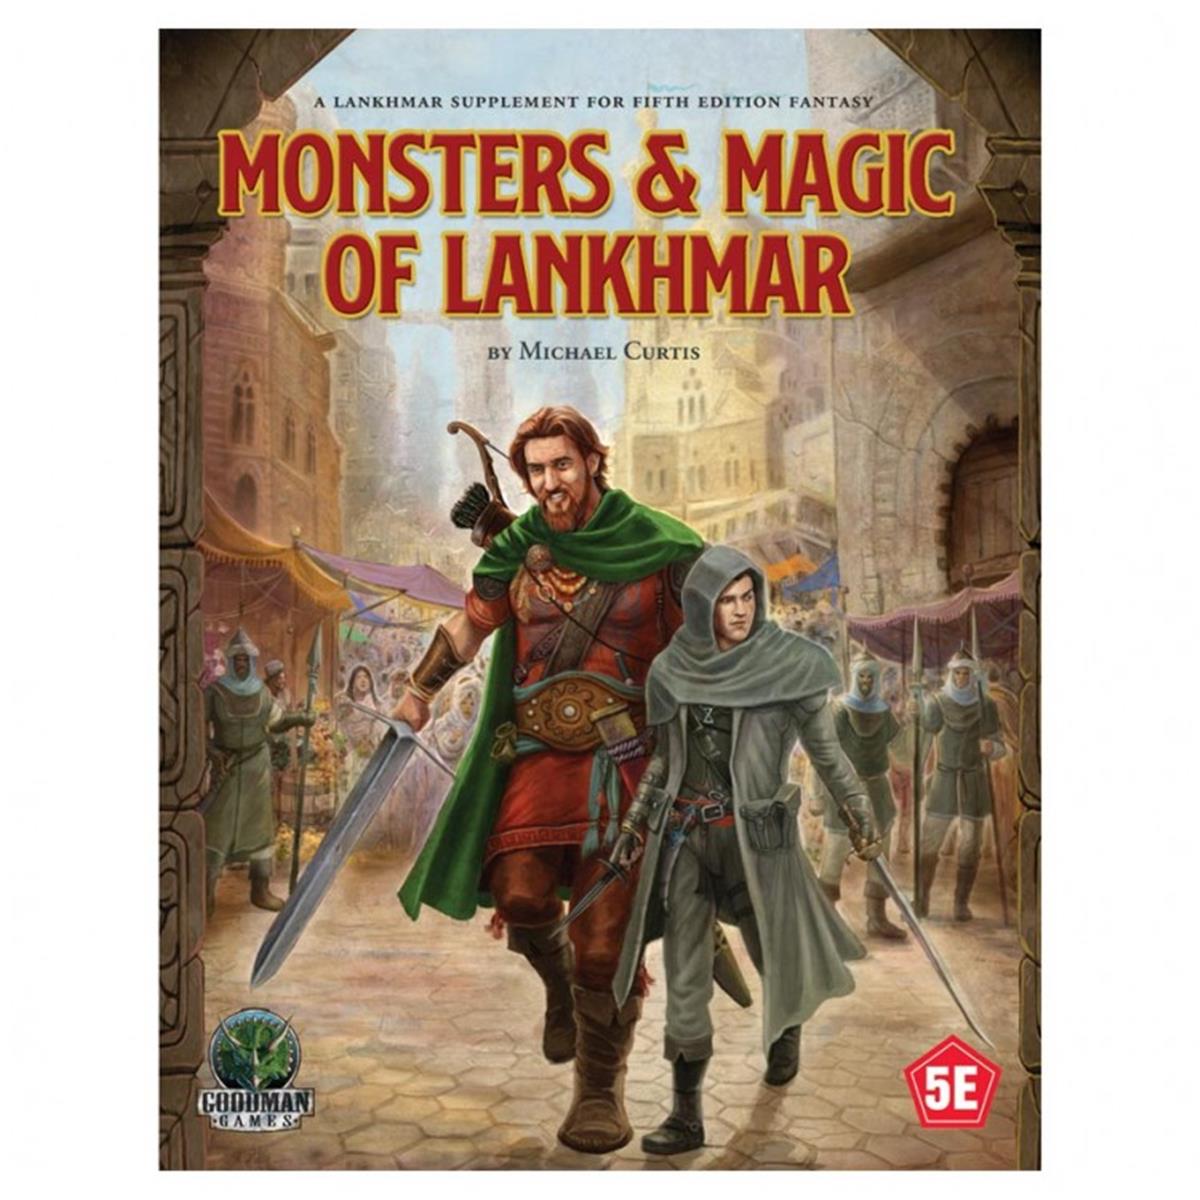 Picture of Goodman Games GMG5560 Dungeons & Dragons 5E Monsters & Magic of Lankhmar Softcover